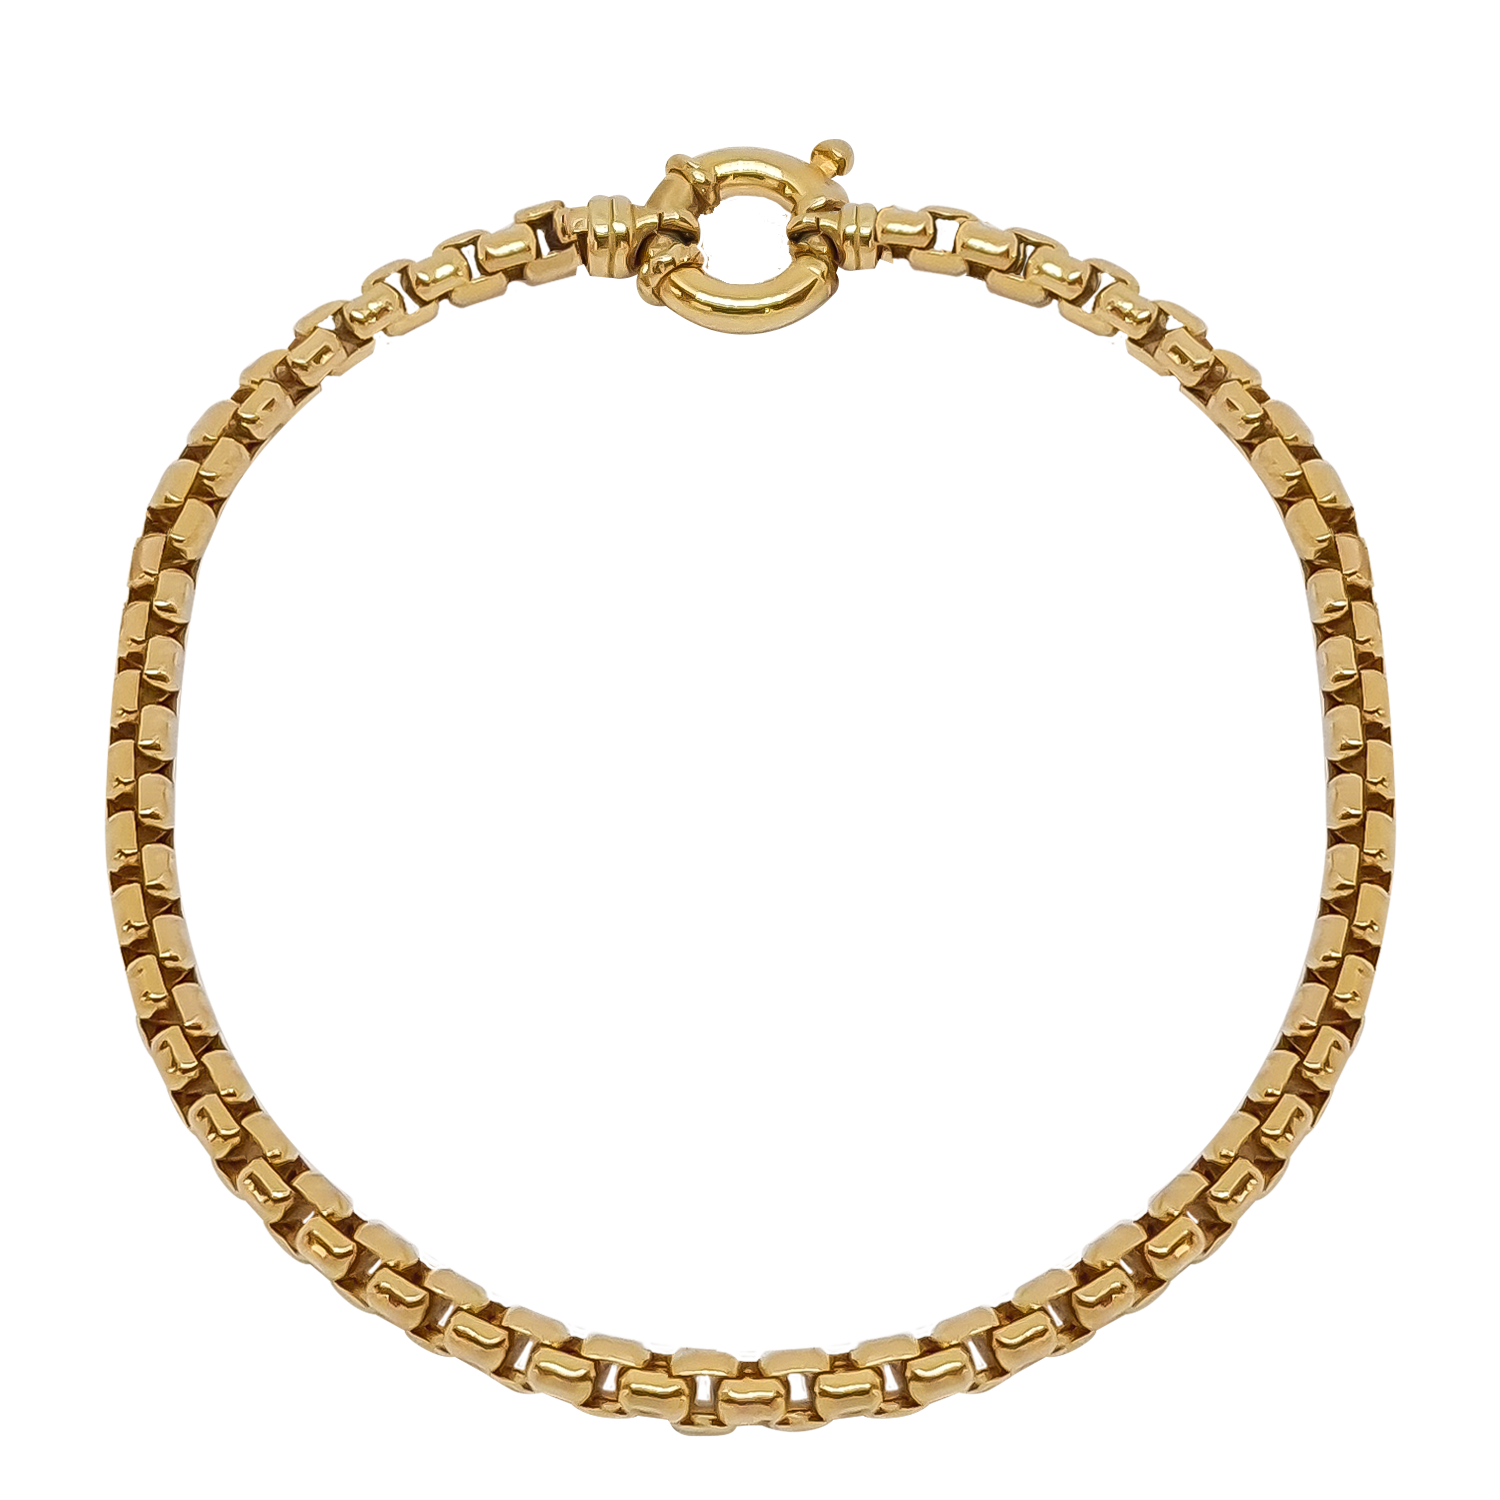 Box-Link Bracelet in 9ct Yellow Gold.